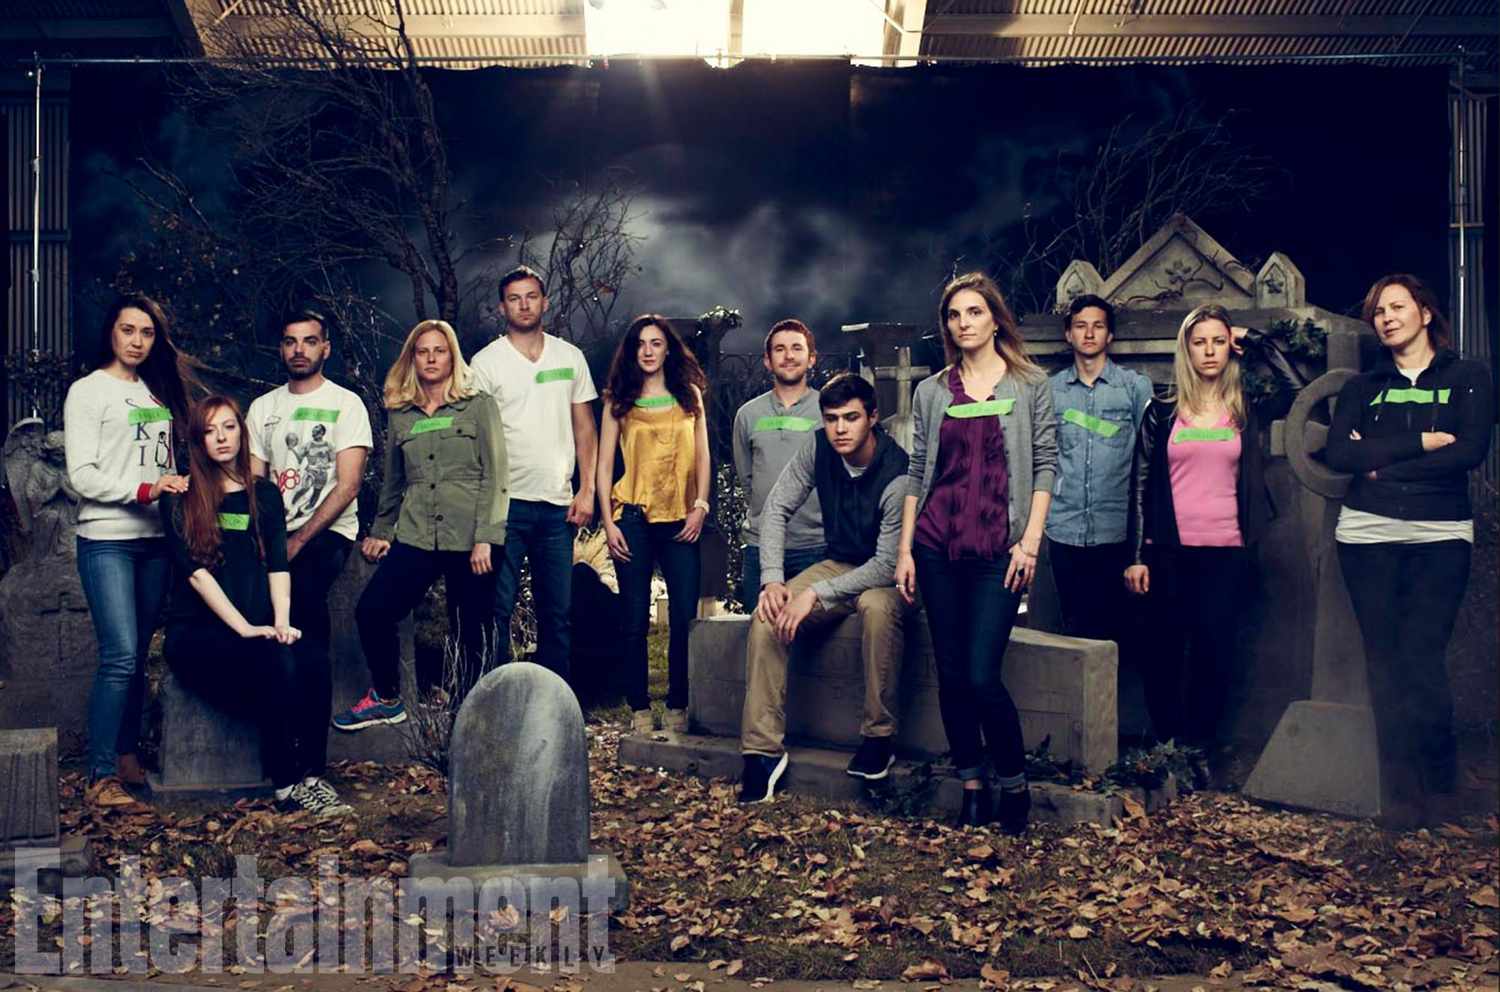 Stand-Ins For the Cast of Buffy The Vampire Slayer